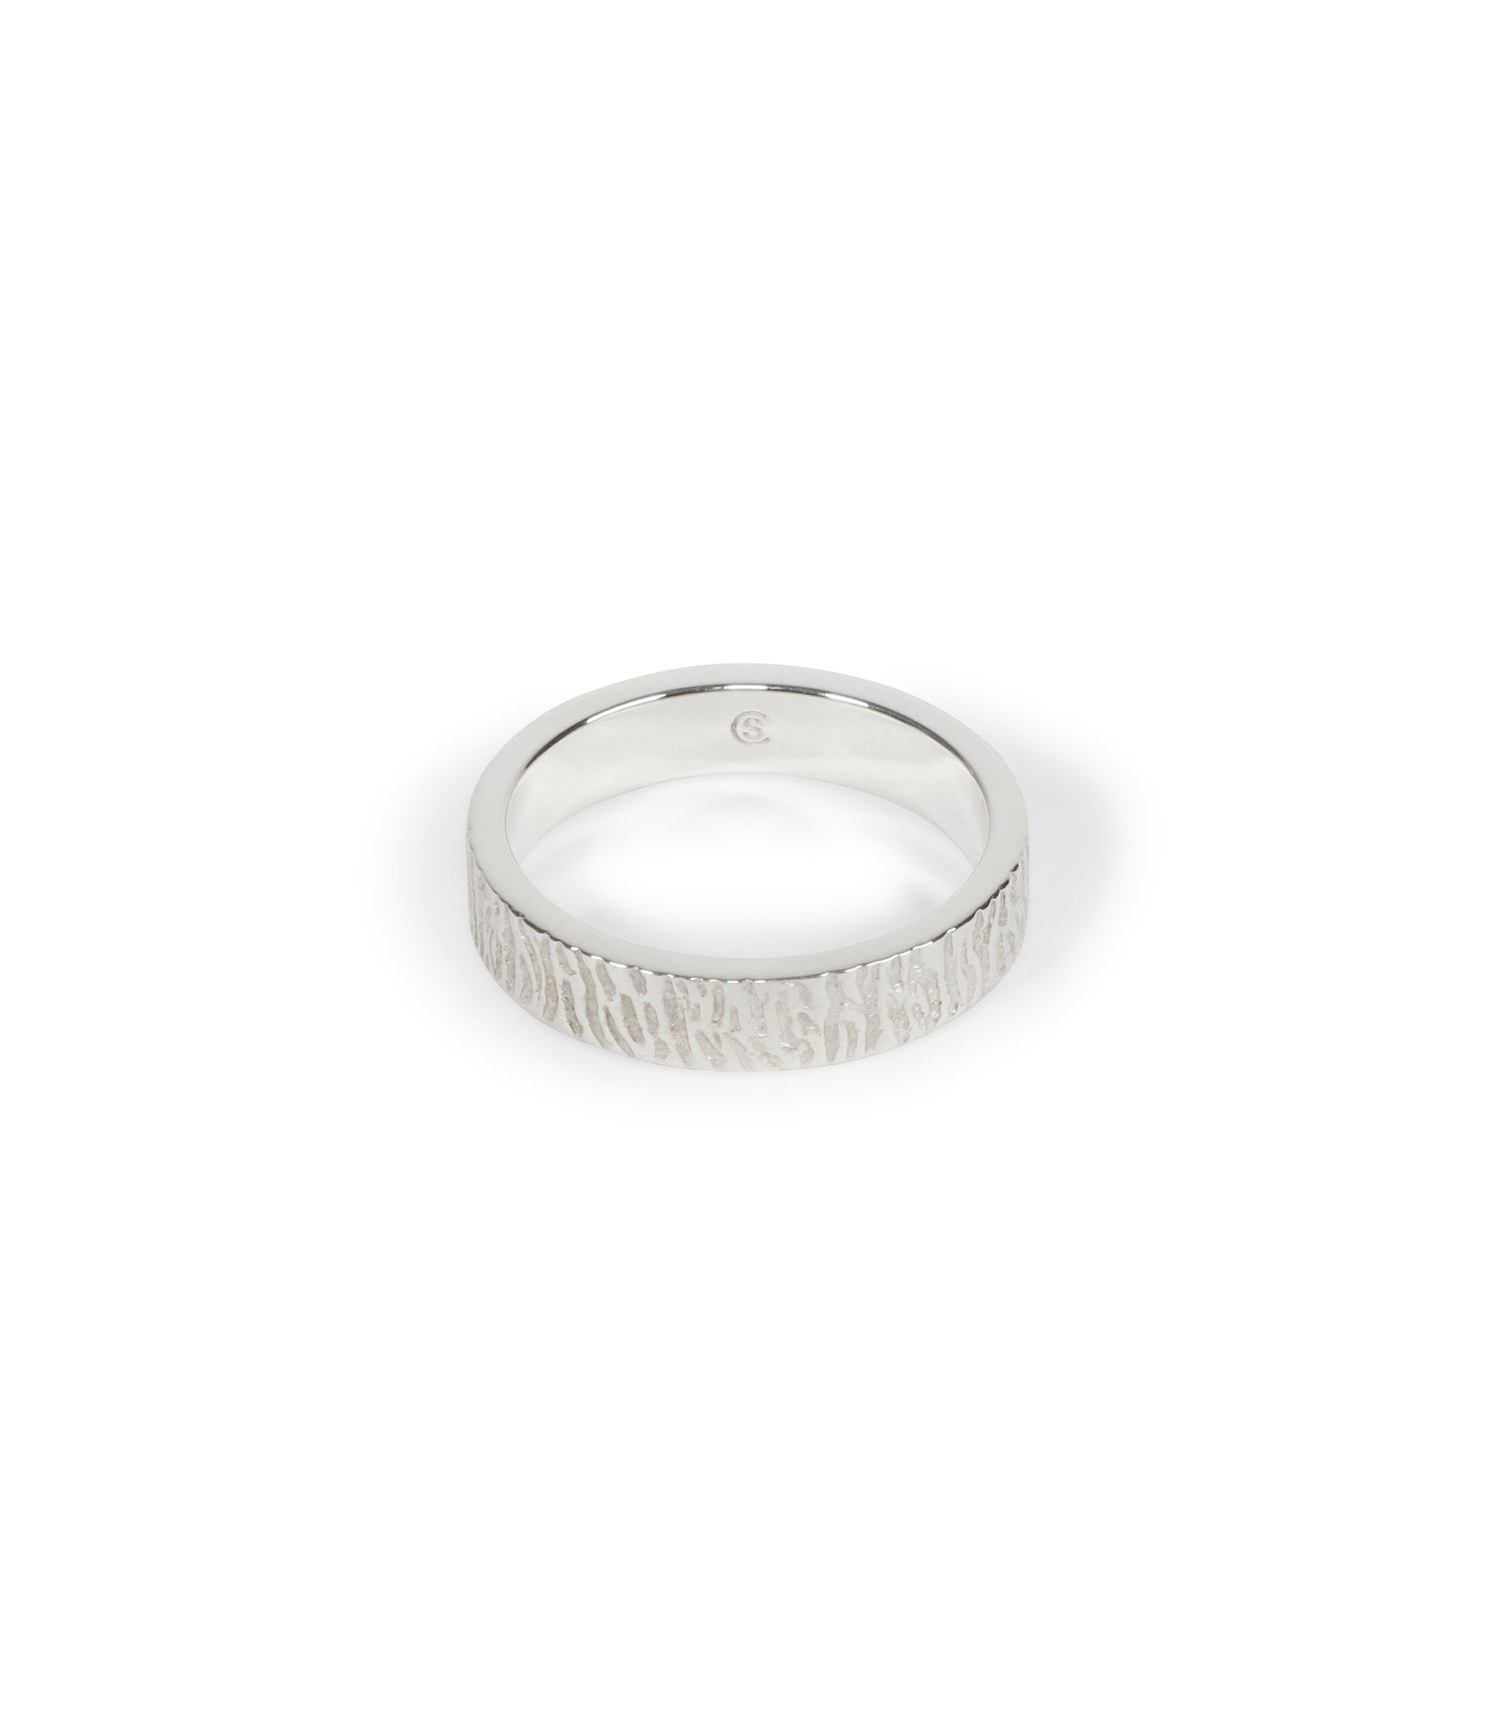 TYPE 005 Texture Ring - 925 Sterling Silver